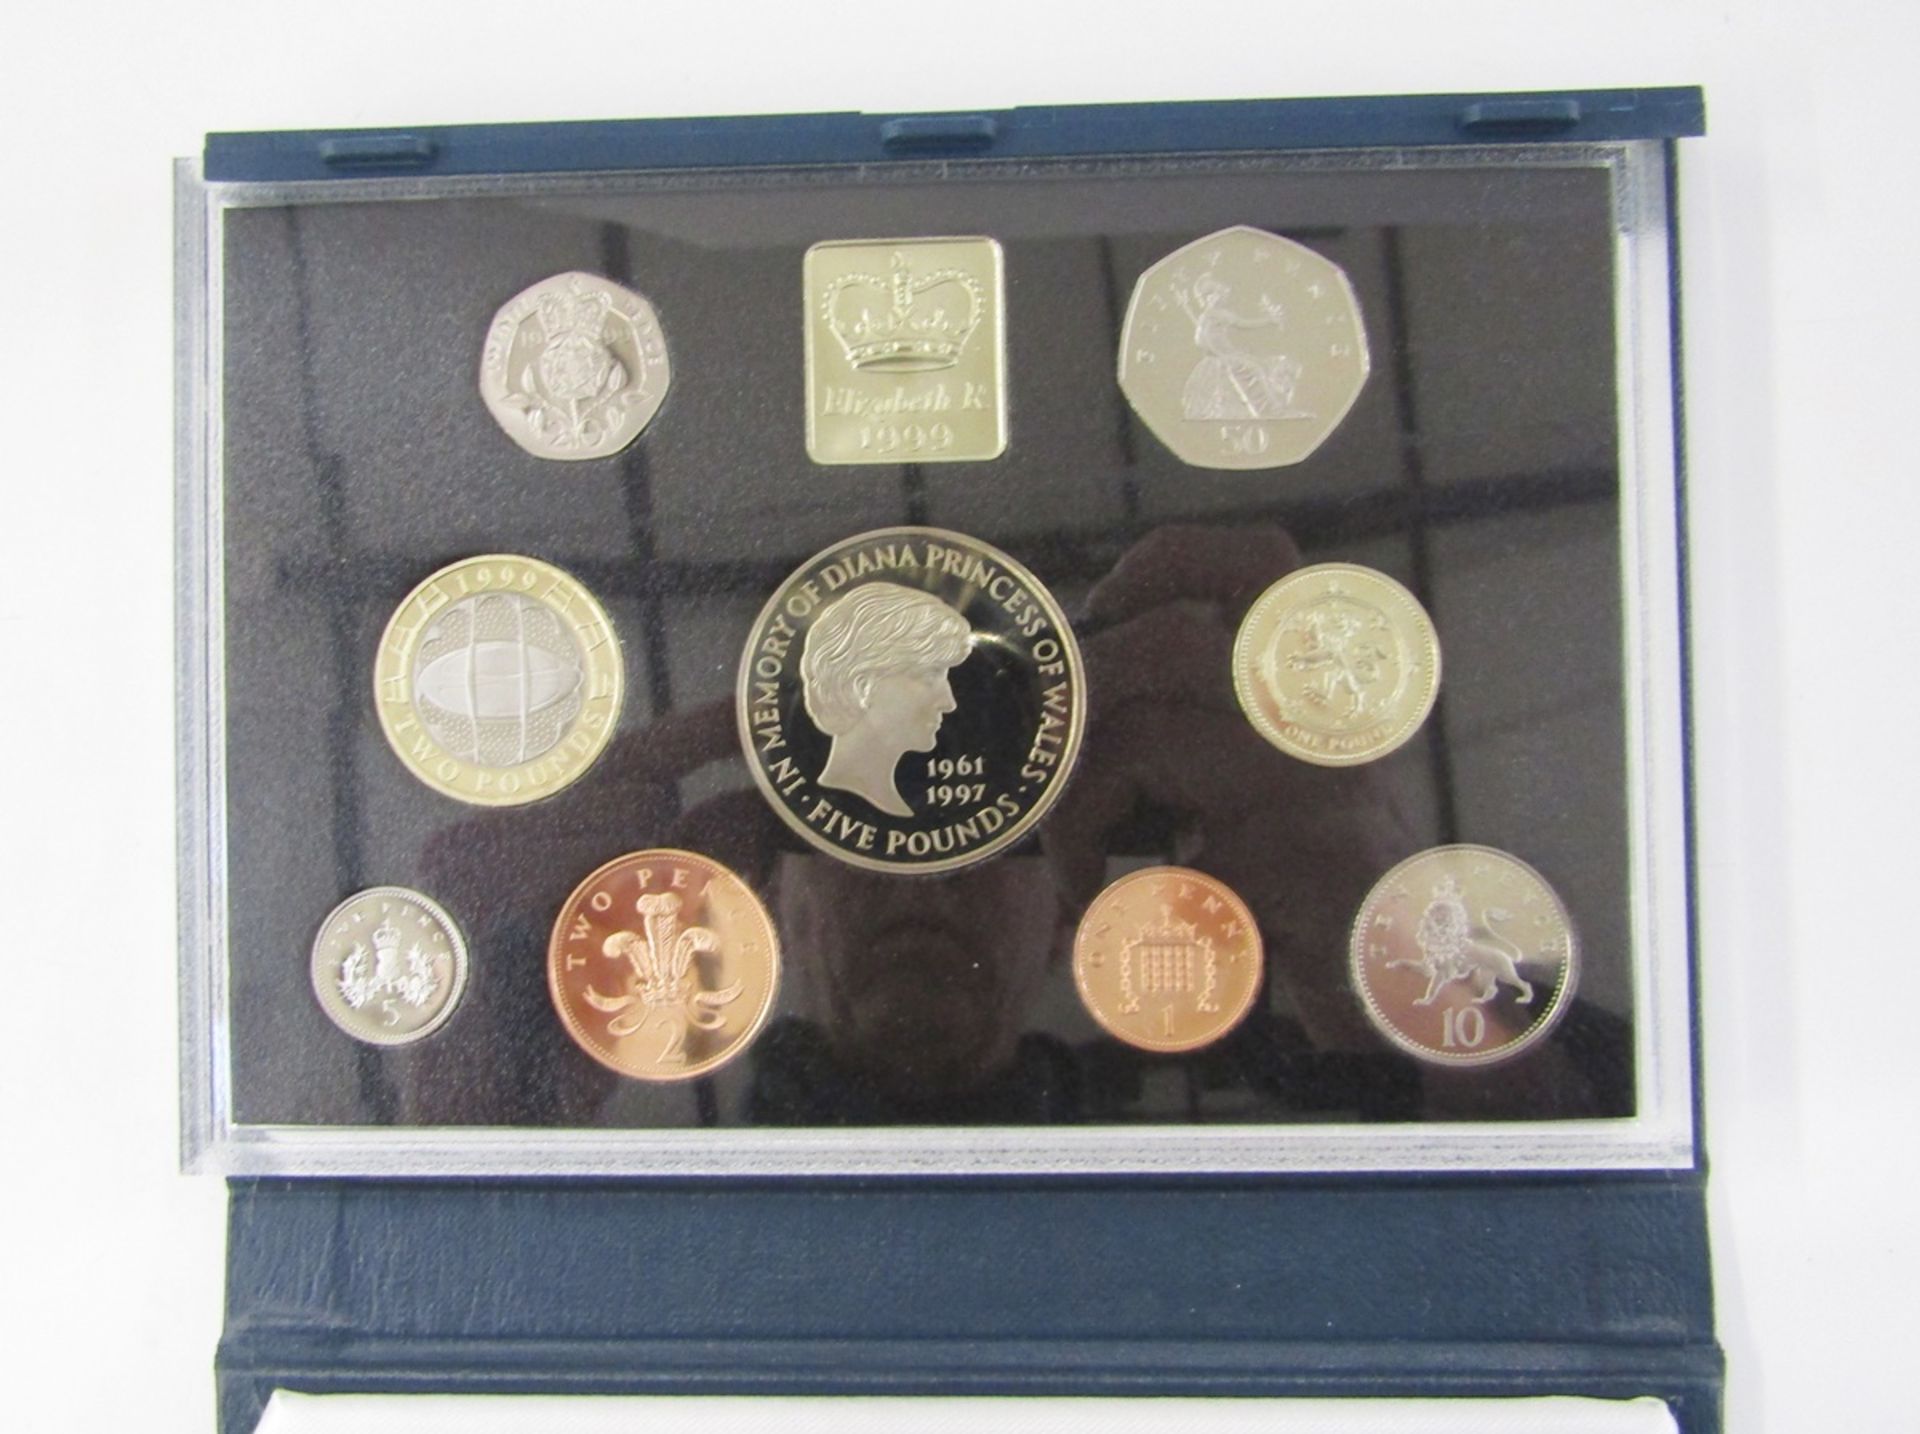 United Kingdom proof sets (5), 1996, 1997, 1998, 1999 and 2000. - Image 5 of 5